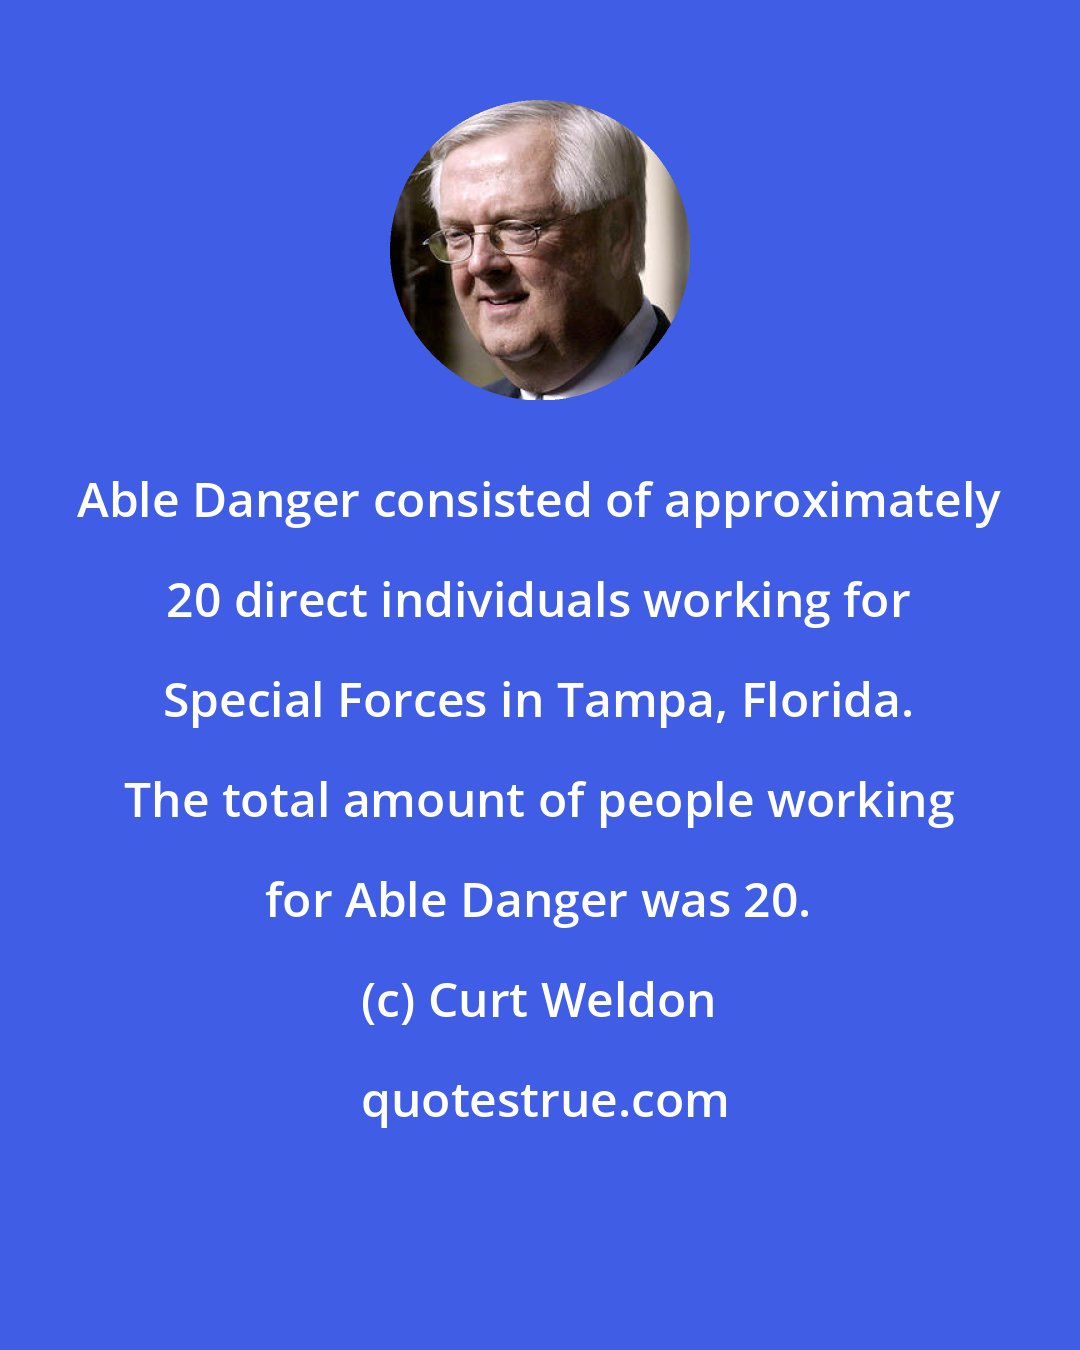 Curt Weldon: Able Danger consisted of approximately 20 direct individuals working for Special Forces in Tampa, Florida. The total amount of people working for Able Danger was 20.